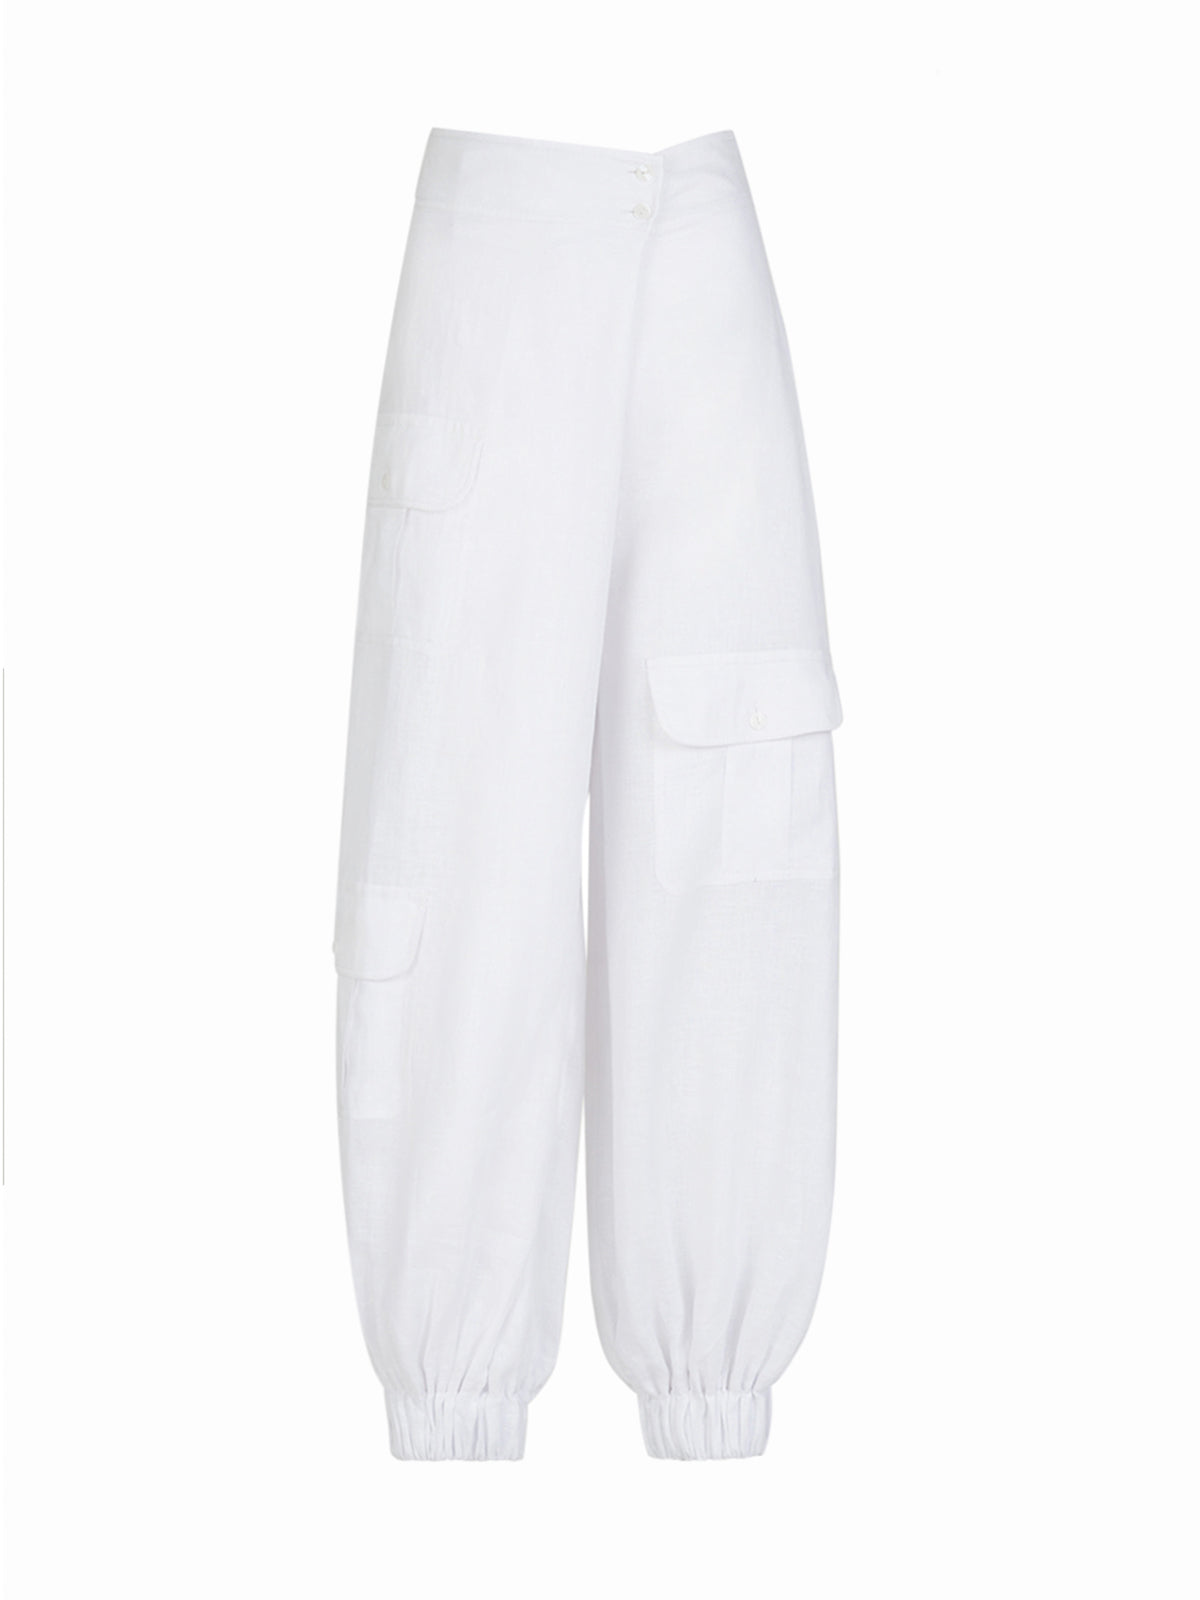 These white cargo pants feature multiple pockets and are perfect for a casual Brandon Pant White Linen outfit.